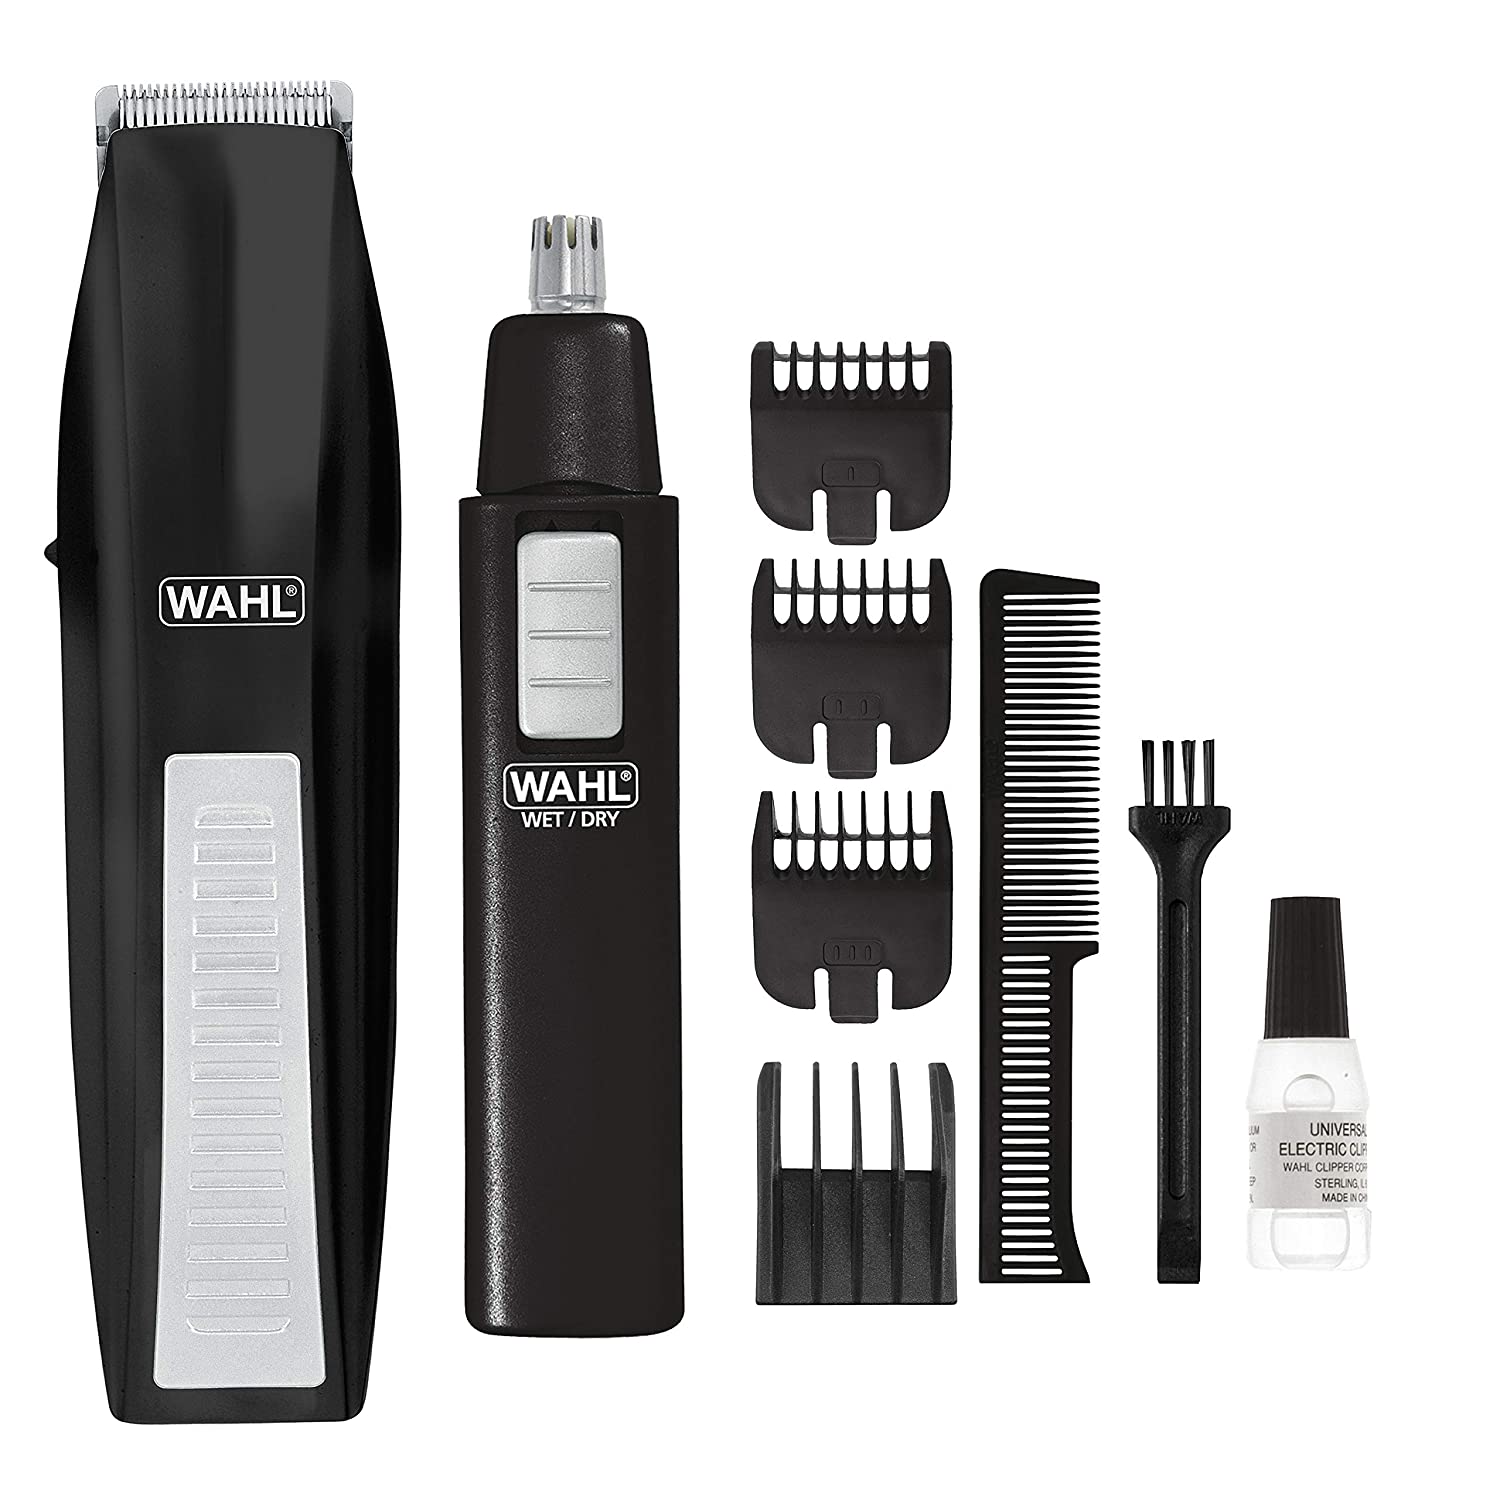 Wahl Cordless Beard Trimmer w/Ear/Nose/Brow Trimmer - Home Decor Gifts and More